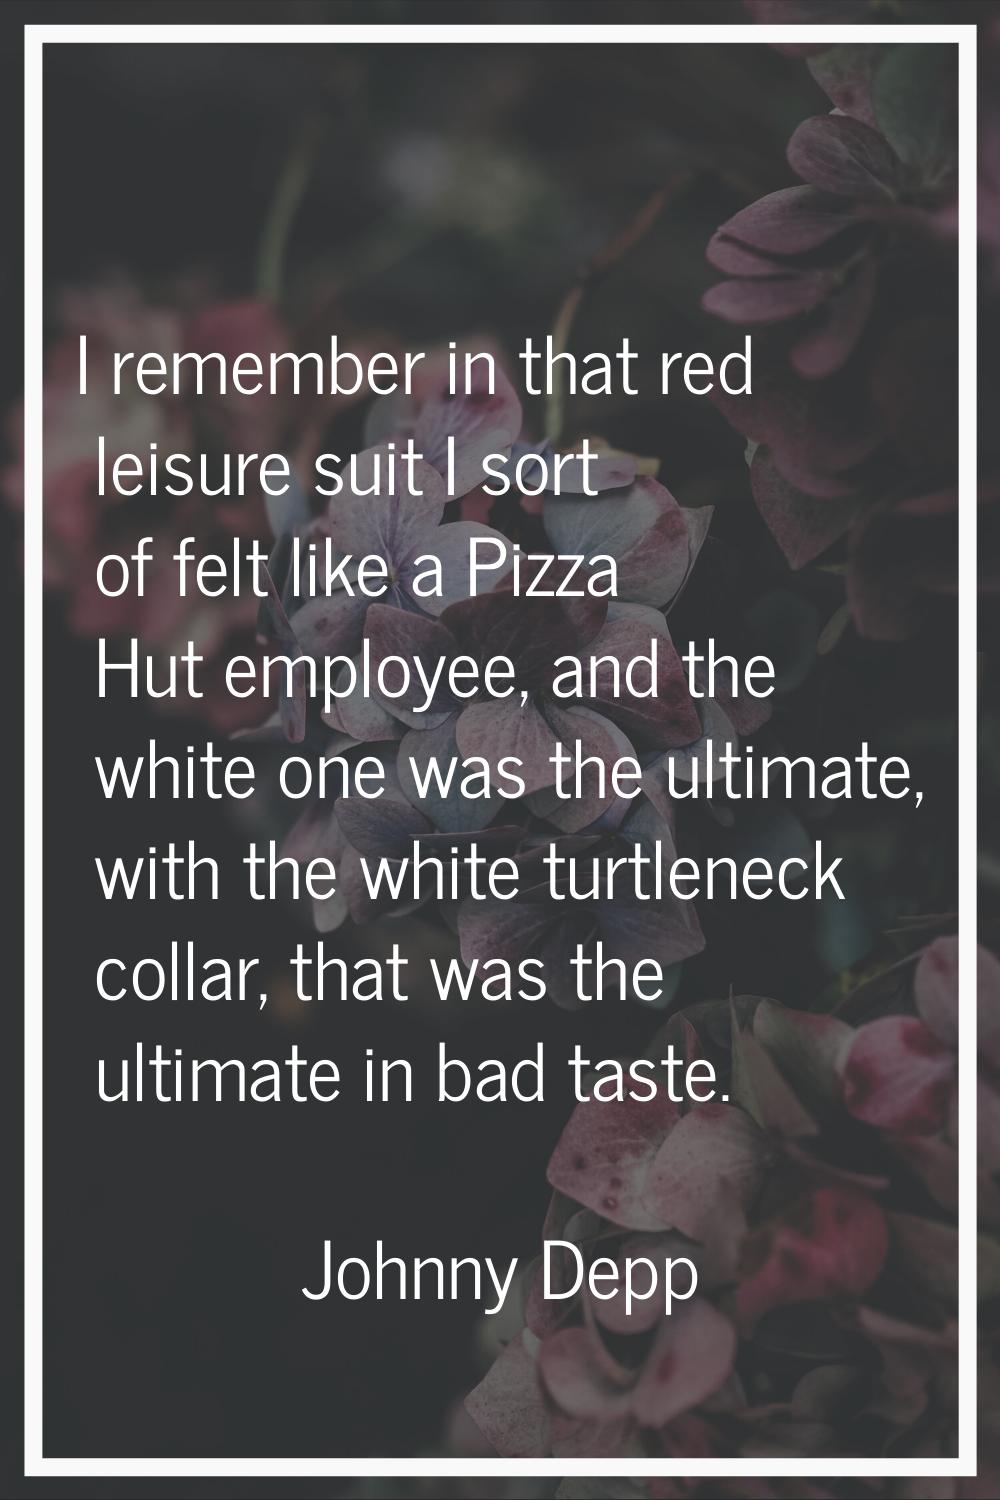 I remember in that red leisure suit I sort of felt like a Pizza Hut employee, and the white one was